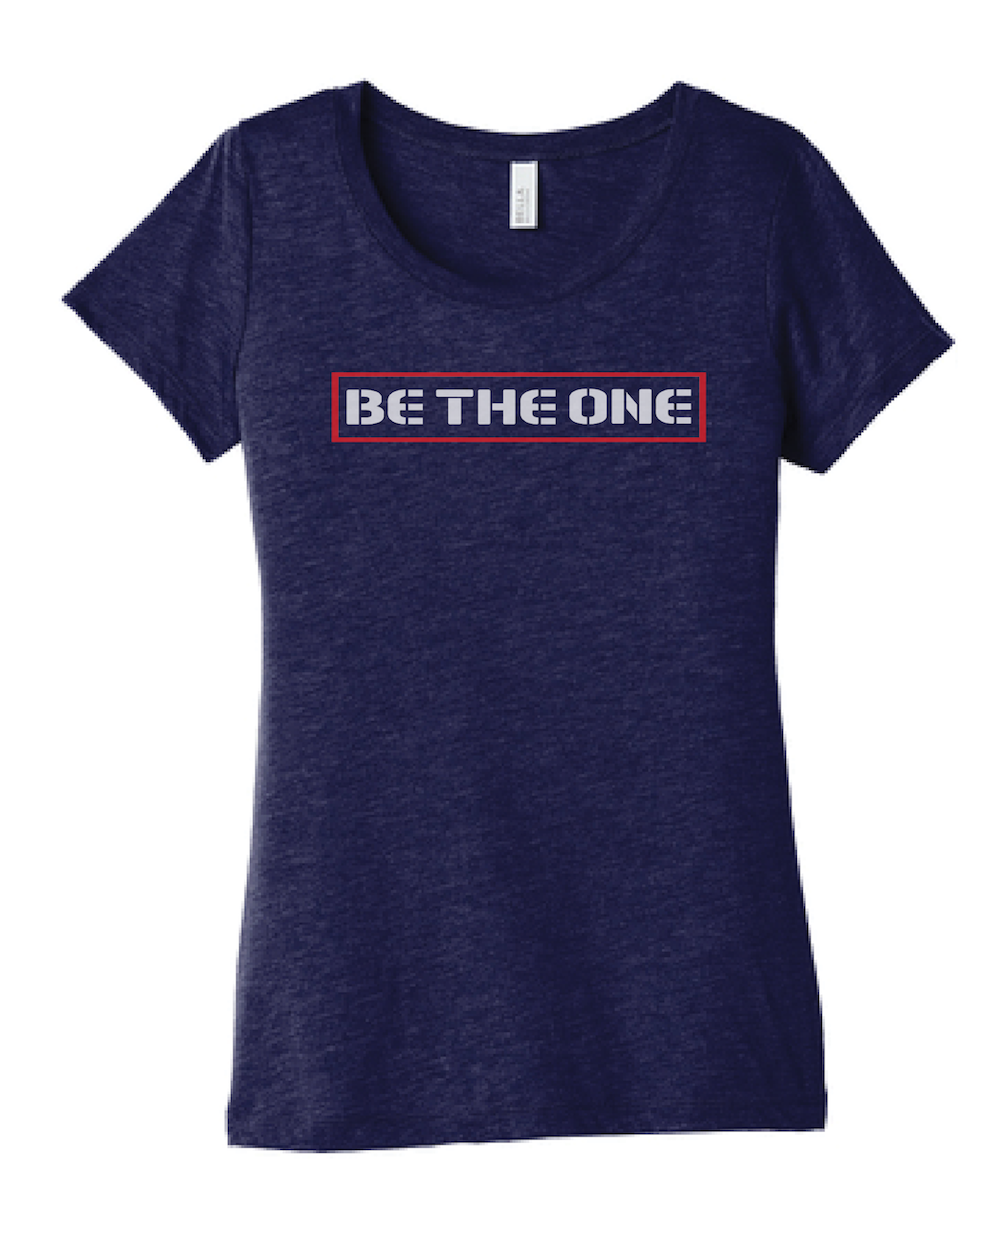 BE THE ONE - Arrows and stars in Navy Triblend -Women's